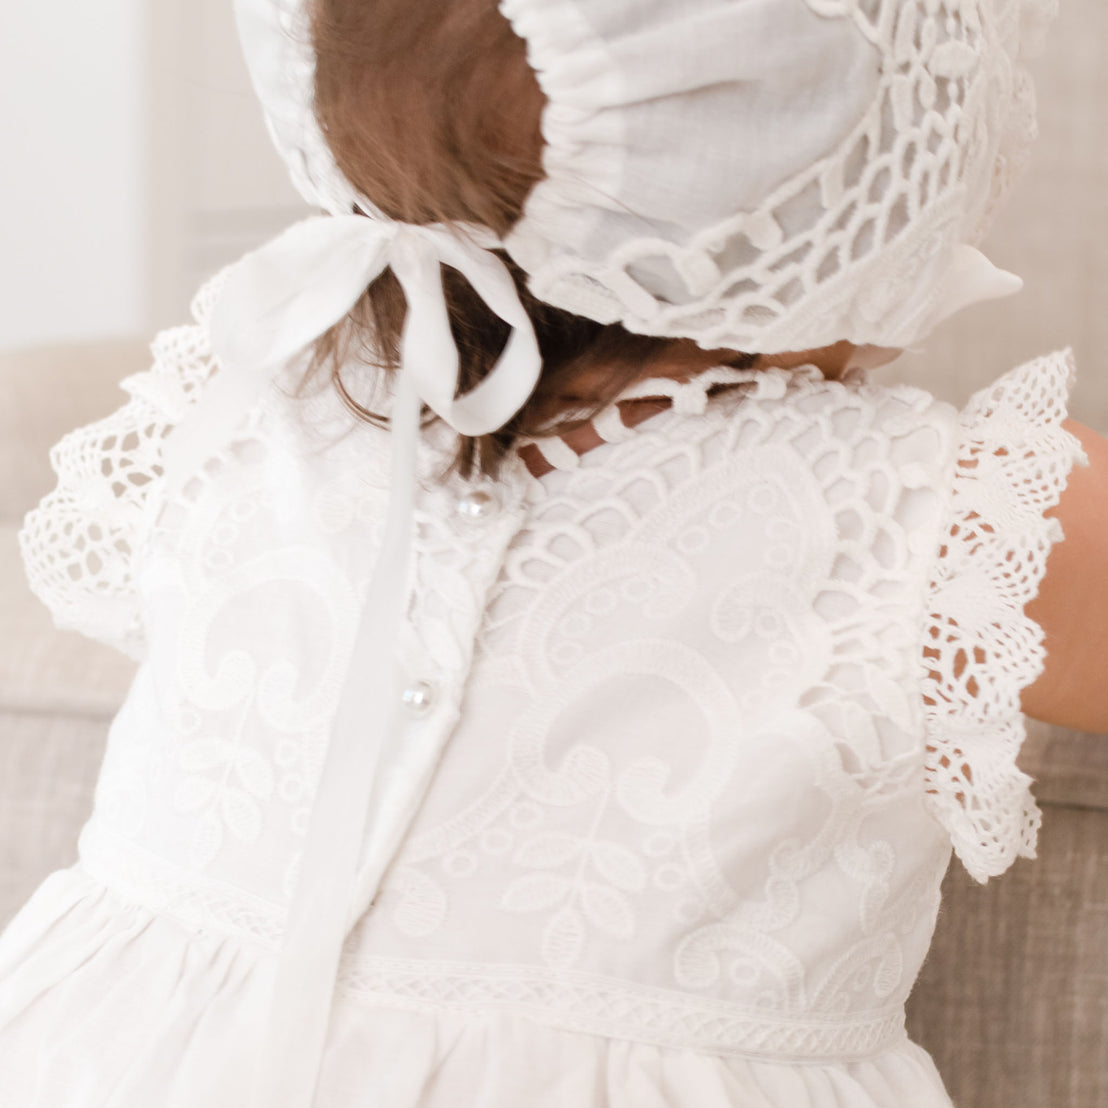 Back detail of the top bodice of a christening romper dress worn by a baby girl